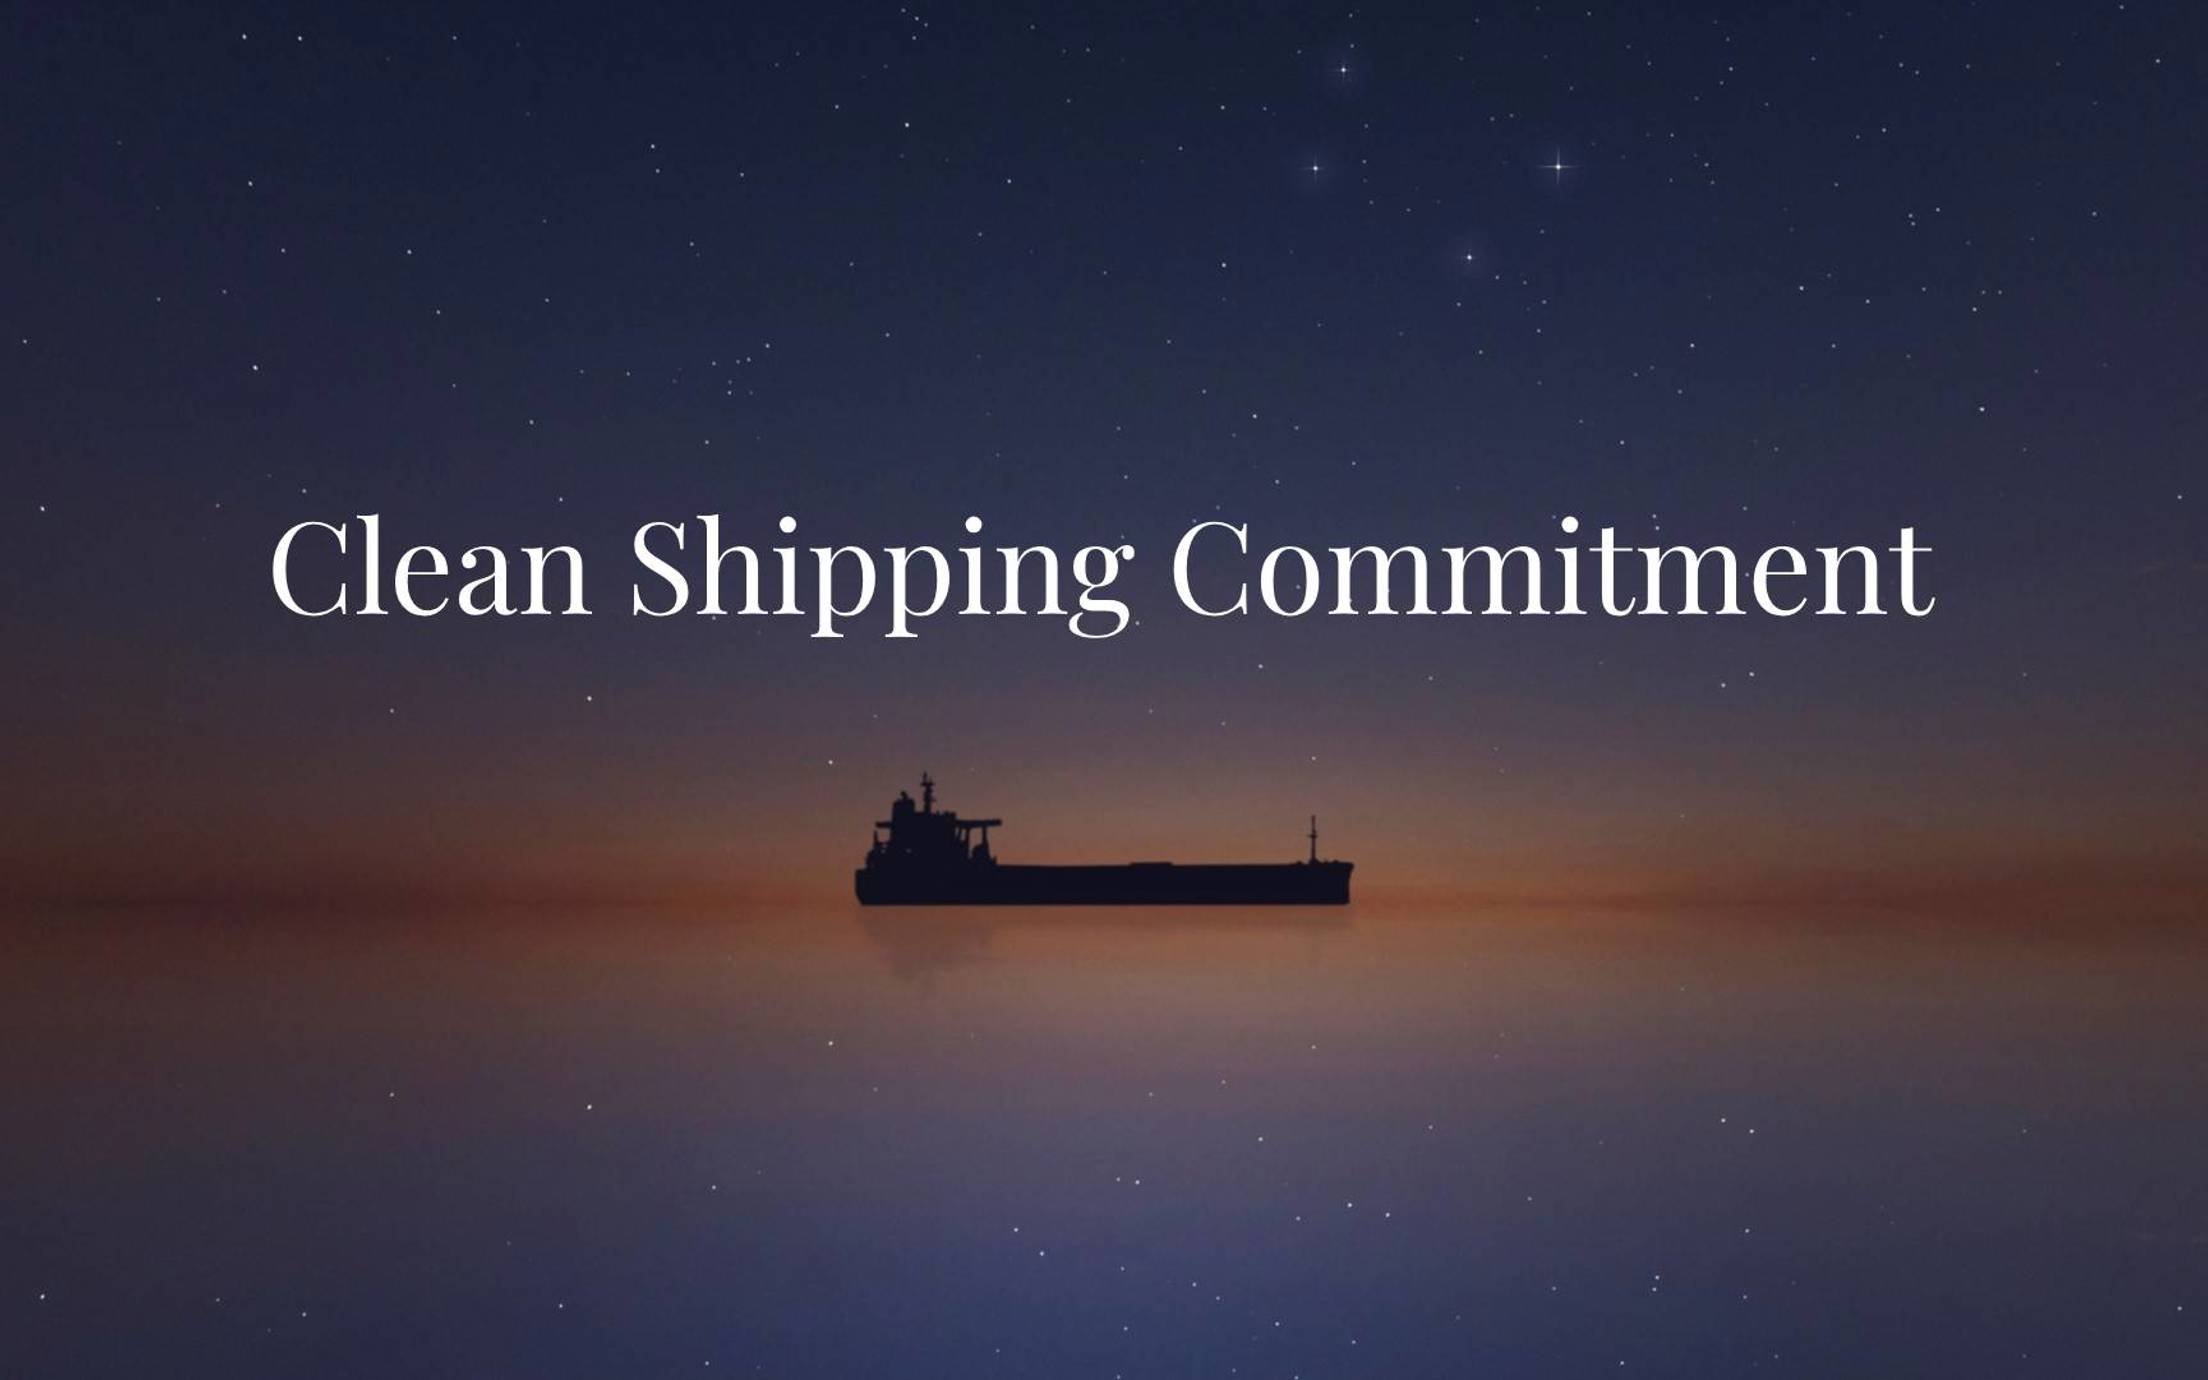 Jotun Clean Shipping Commitment